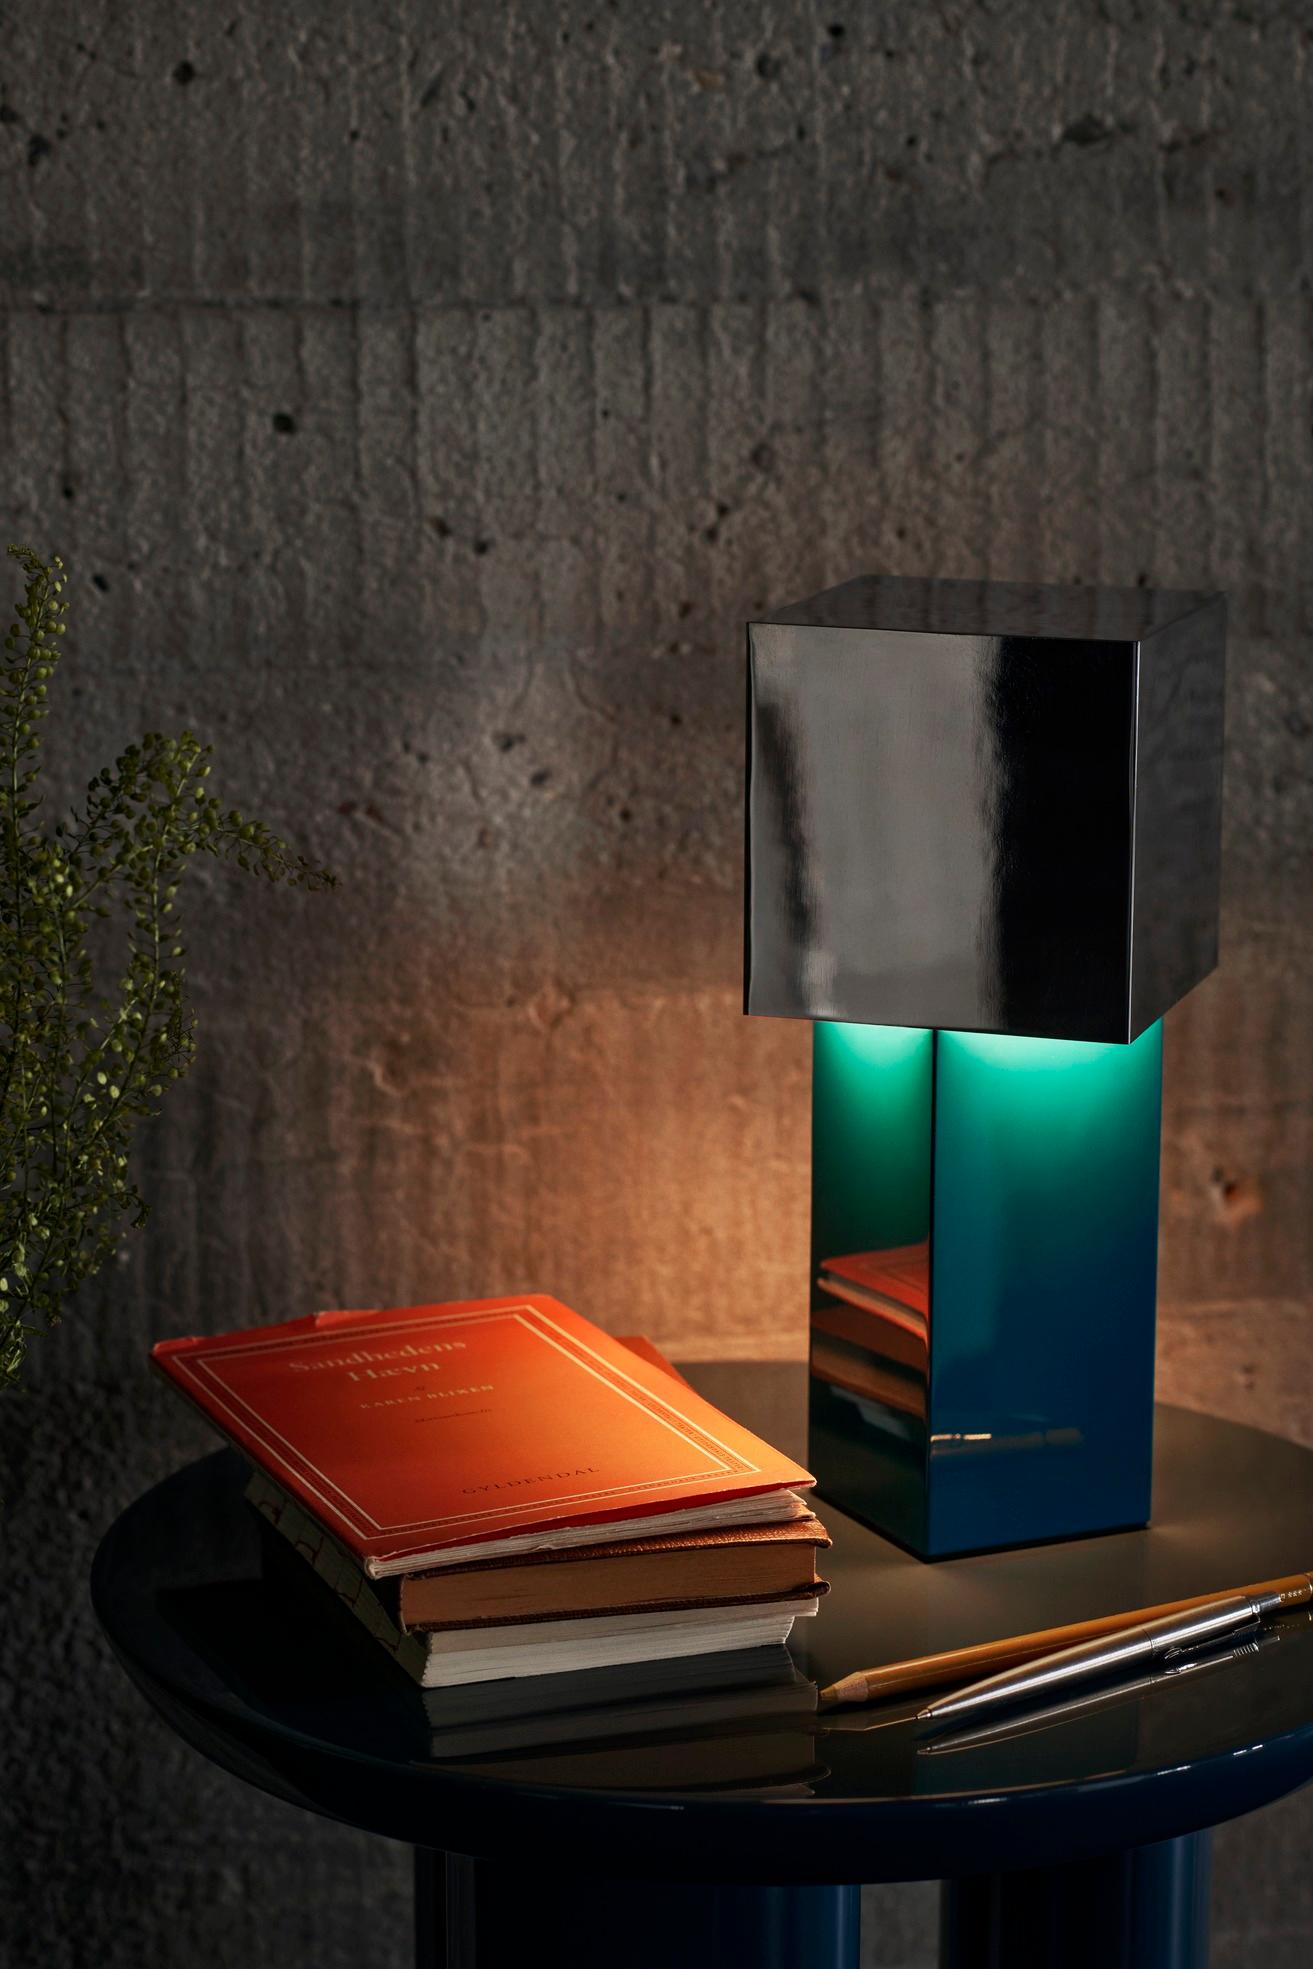 A portable lamp that explores the boundaries between form
and function
At the heart of Pivot’s design is the interplay between natural and manmade light. The lamp’s geometric shade is positioned at a 45-degree angle to the base, creating a soft